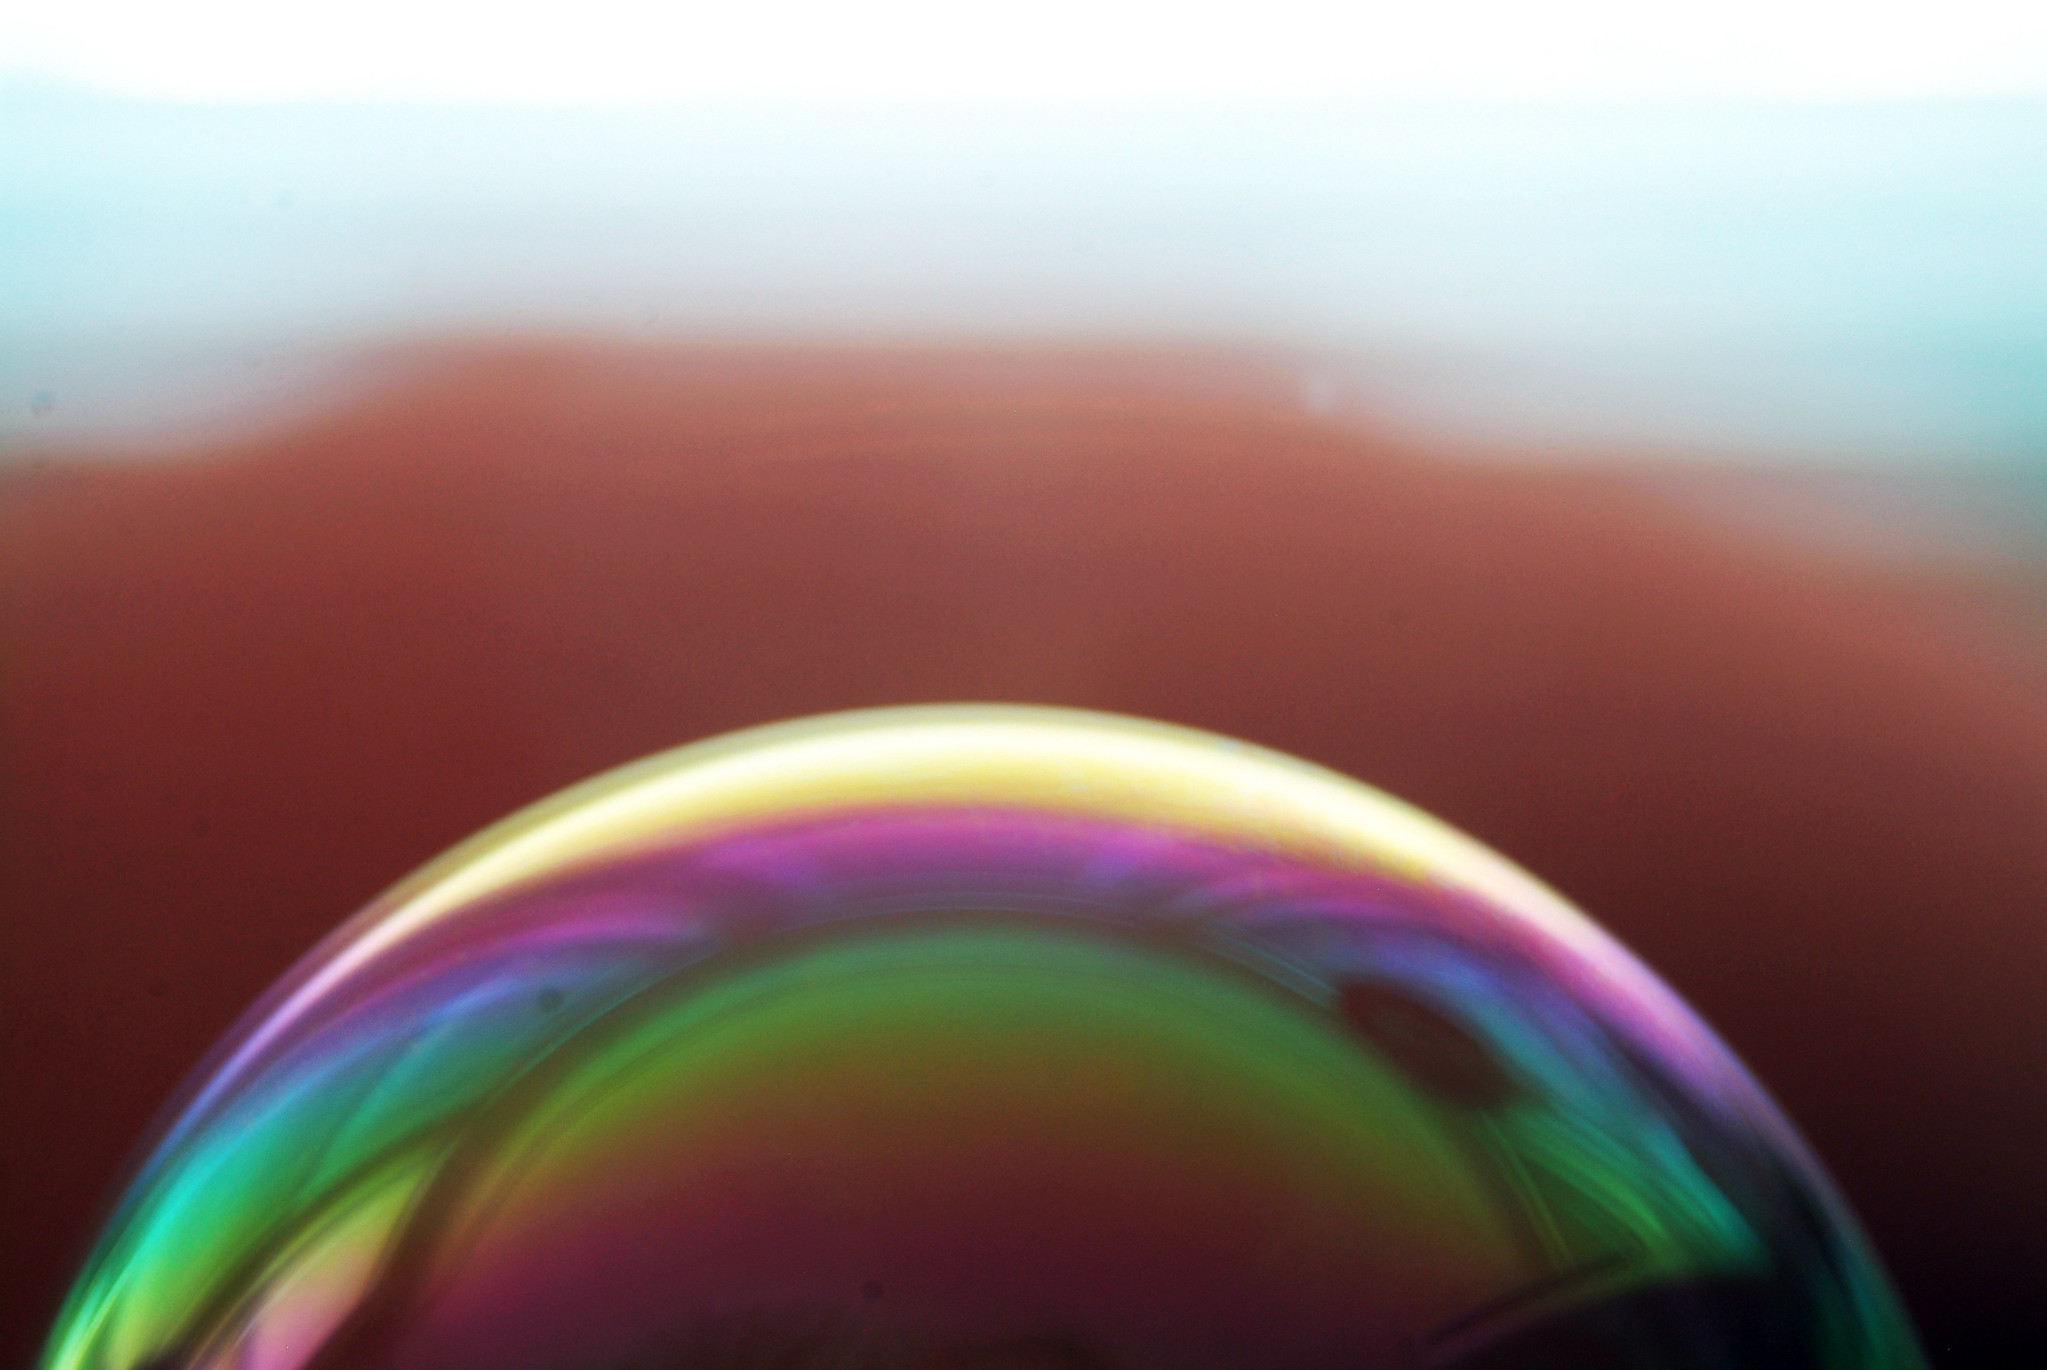 „rainbow bubble“ von Silicon/e steht unter CC BY 2.0 Lizenz , https://creativecommons.org/licenses/by/2.0/?ref=ccsearch&atype=rich